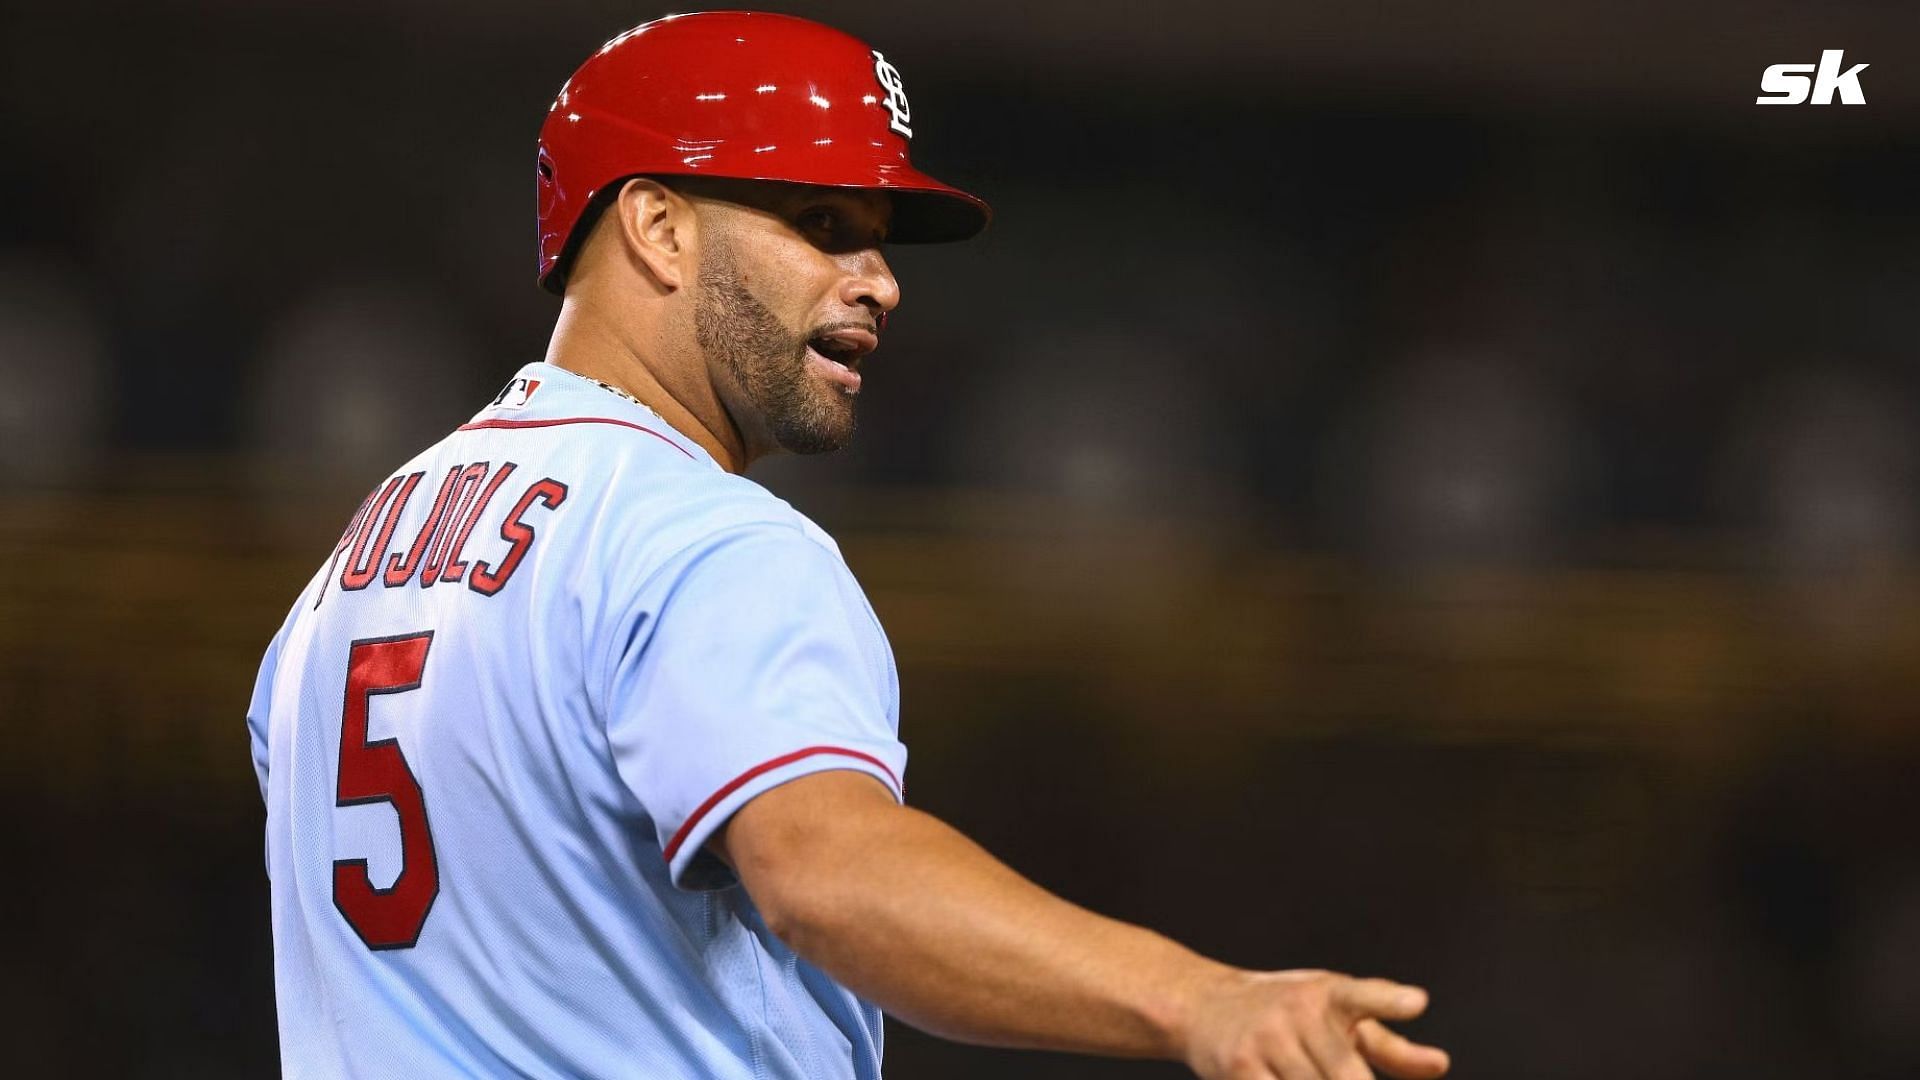 Albert Pujols ties the knot with Nicole Fernandez, she took to Instagram to celebrate the big day